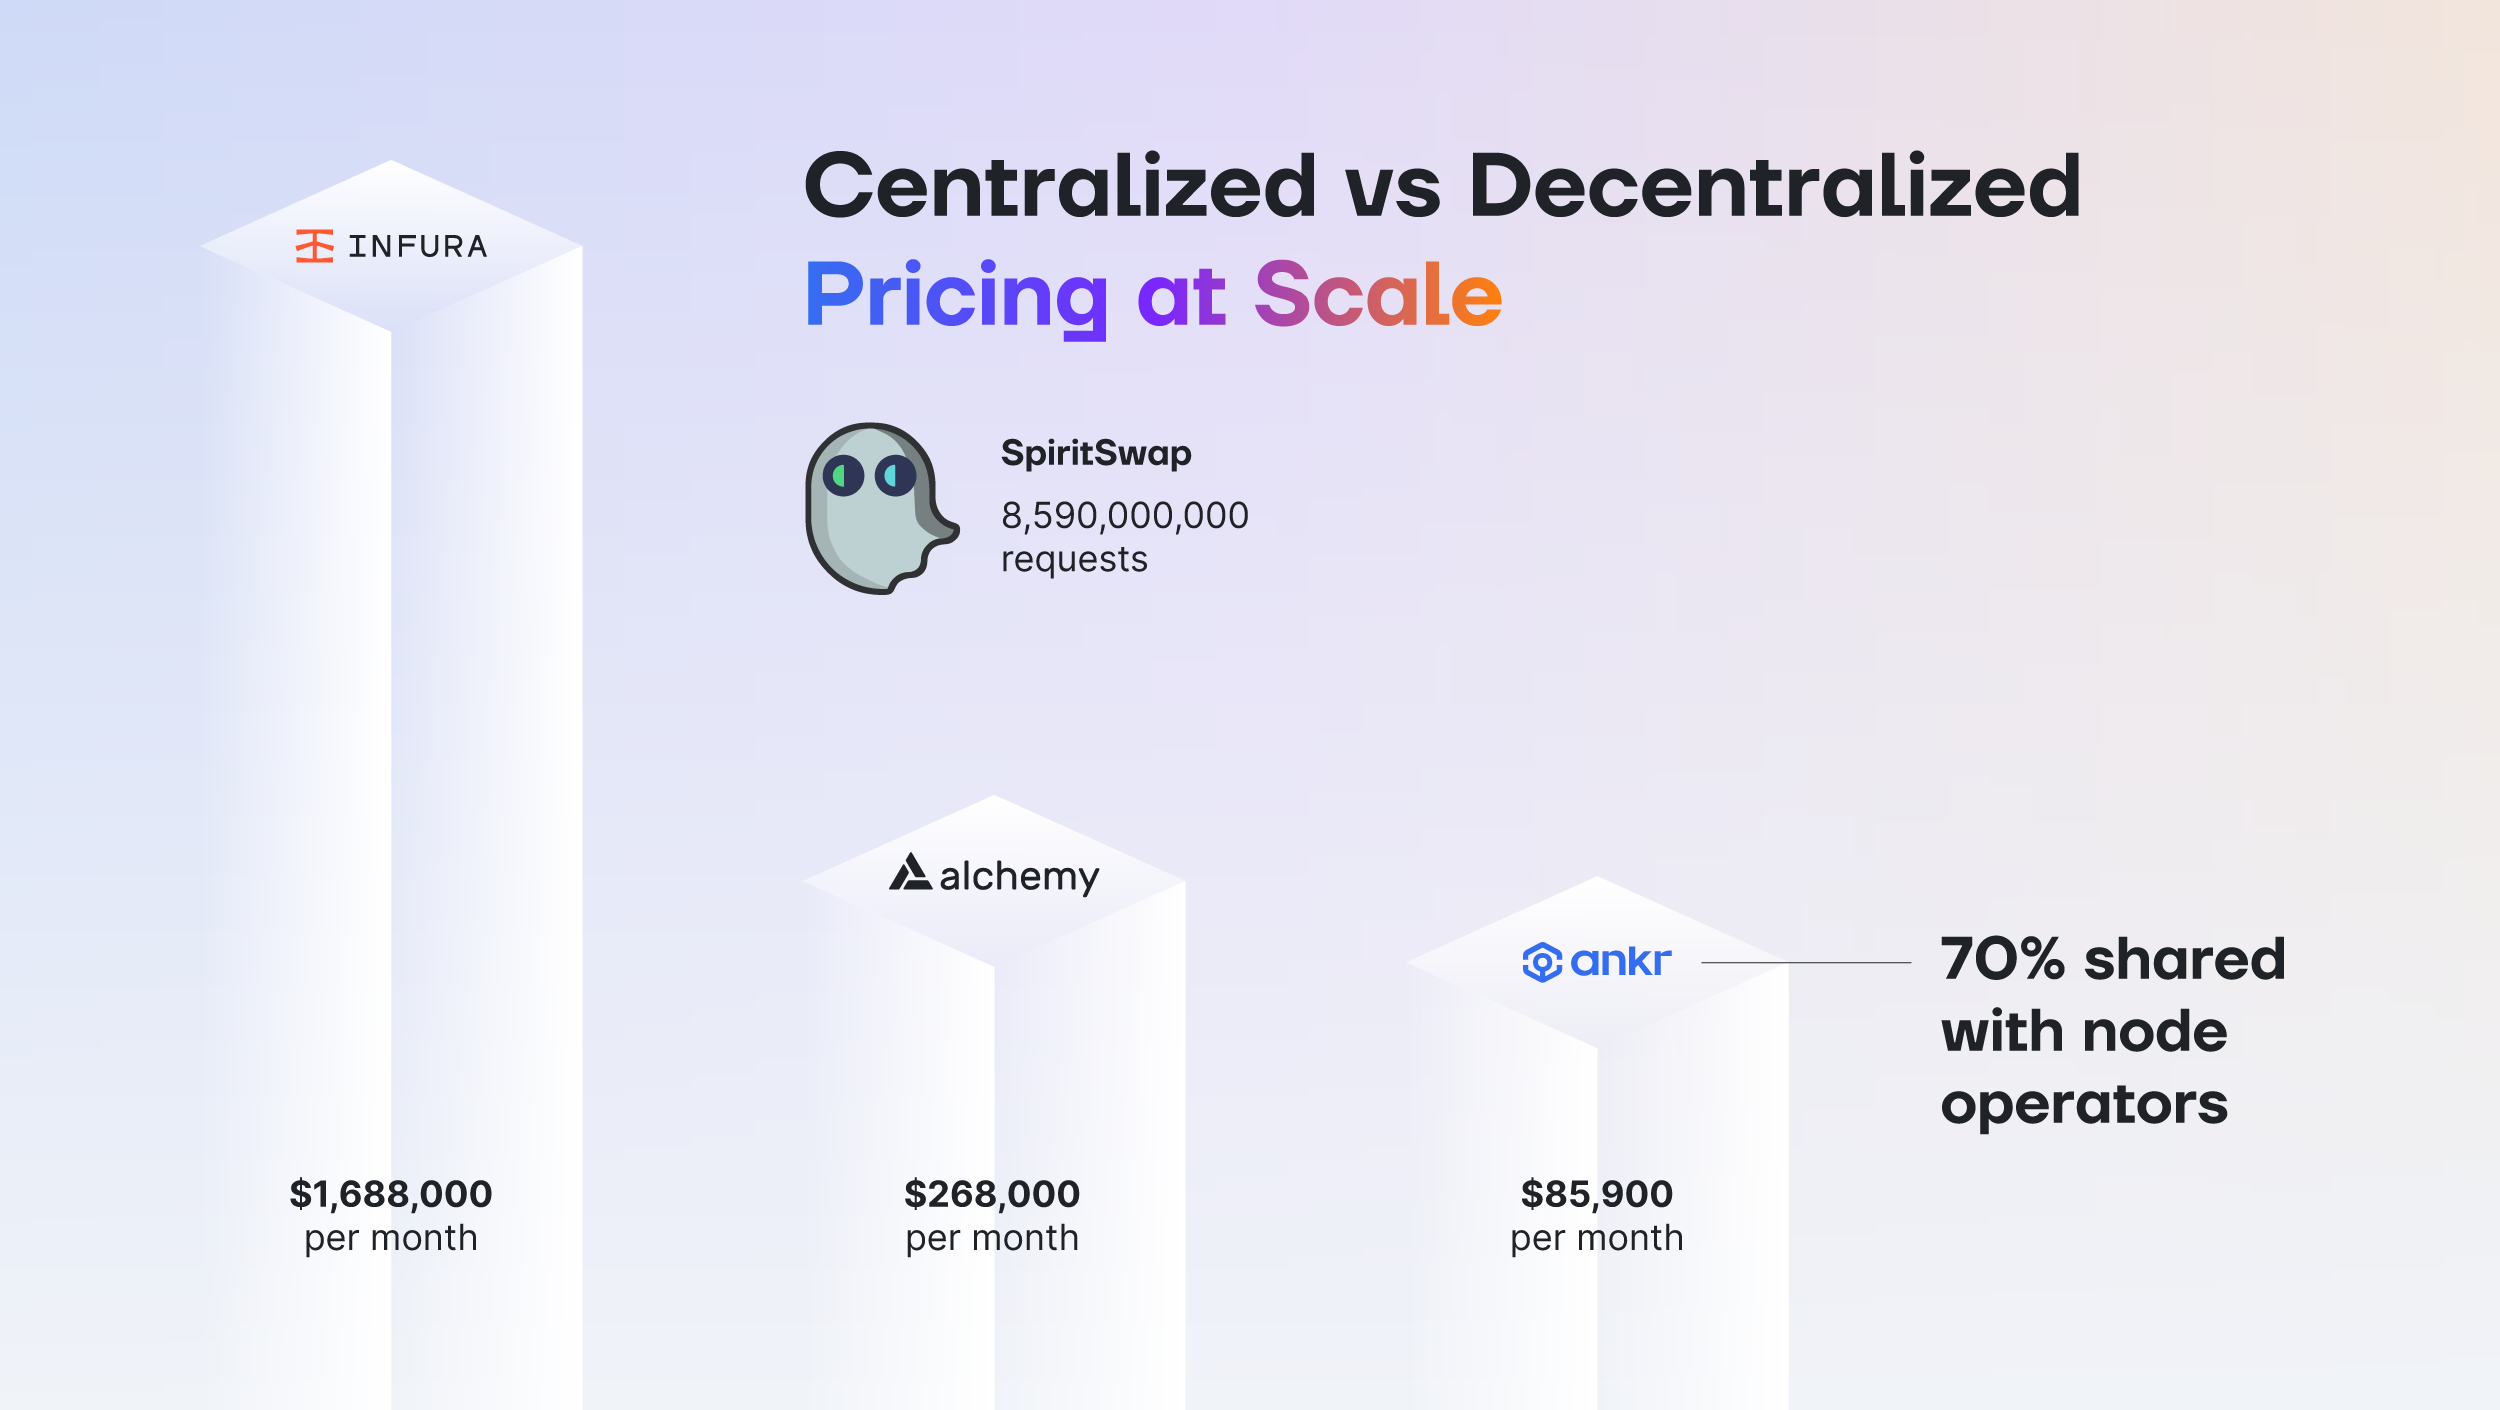 736_Centralized_vs_Decentralized_Pricing_at_Scale_9bbfbd2efb.png